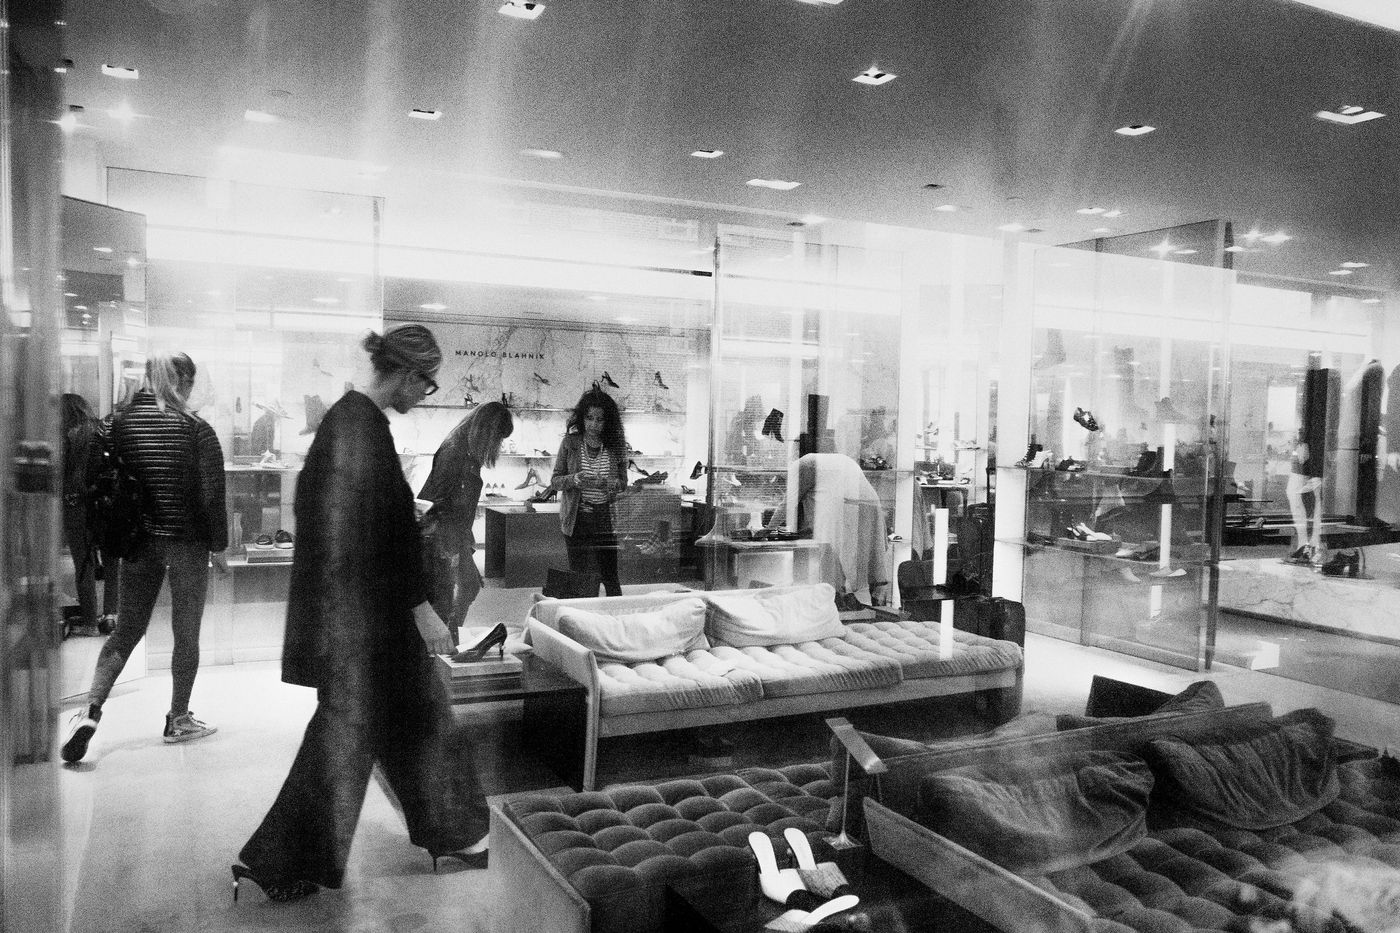 Barneys is closing. Before the bankruptcy and liquidation sales, it was  where my family gathered. - Vox